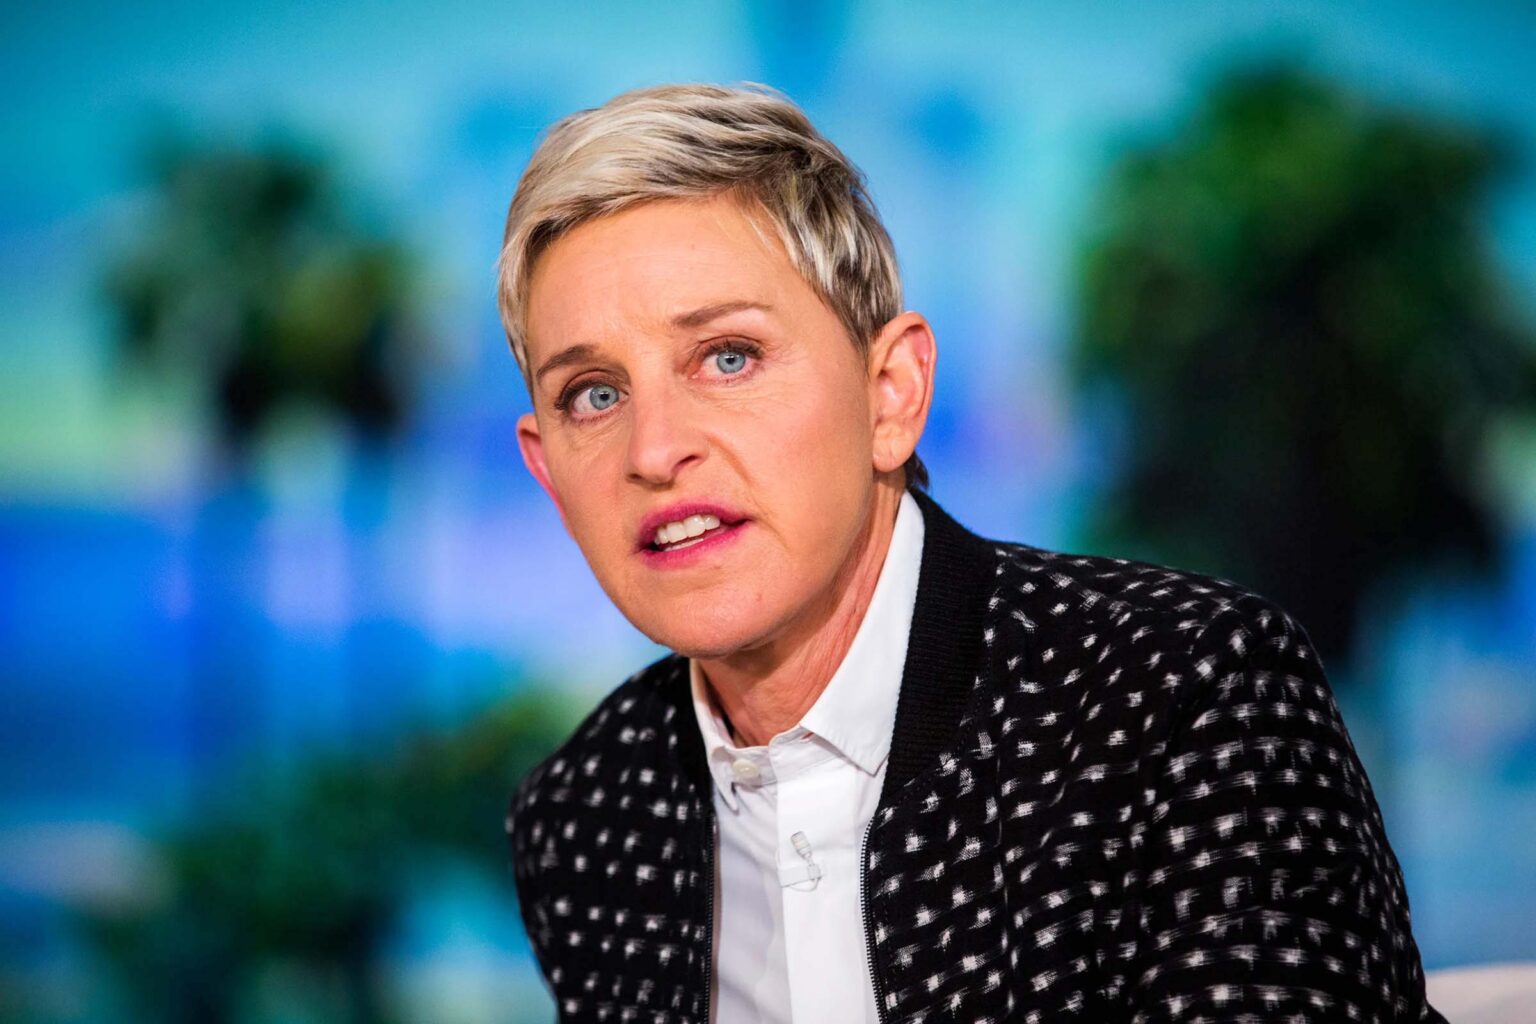 An old tweet by Ellen DeGeneres, in which she bragged about making an employee cry, has come back to haunt her. Is Ellen mean? Here's what we know.